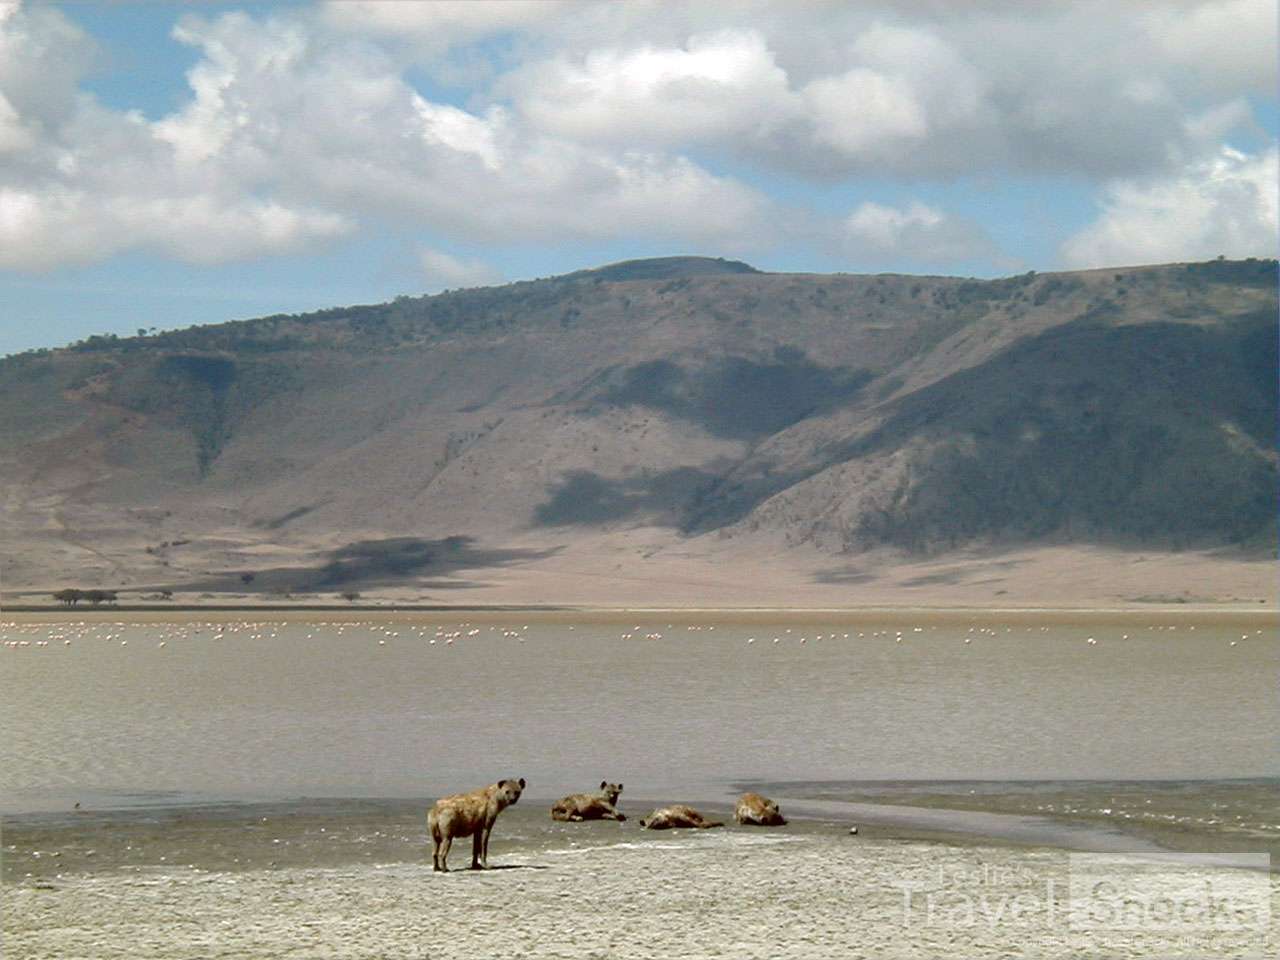 Hyenas with flamingos in the background. 